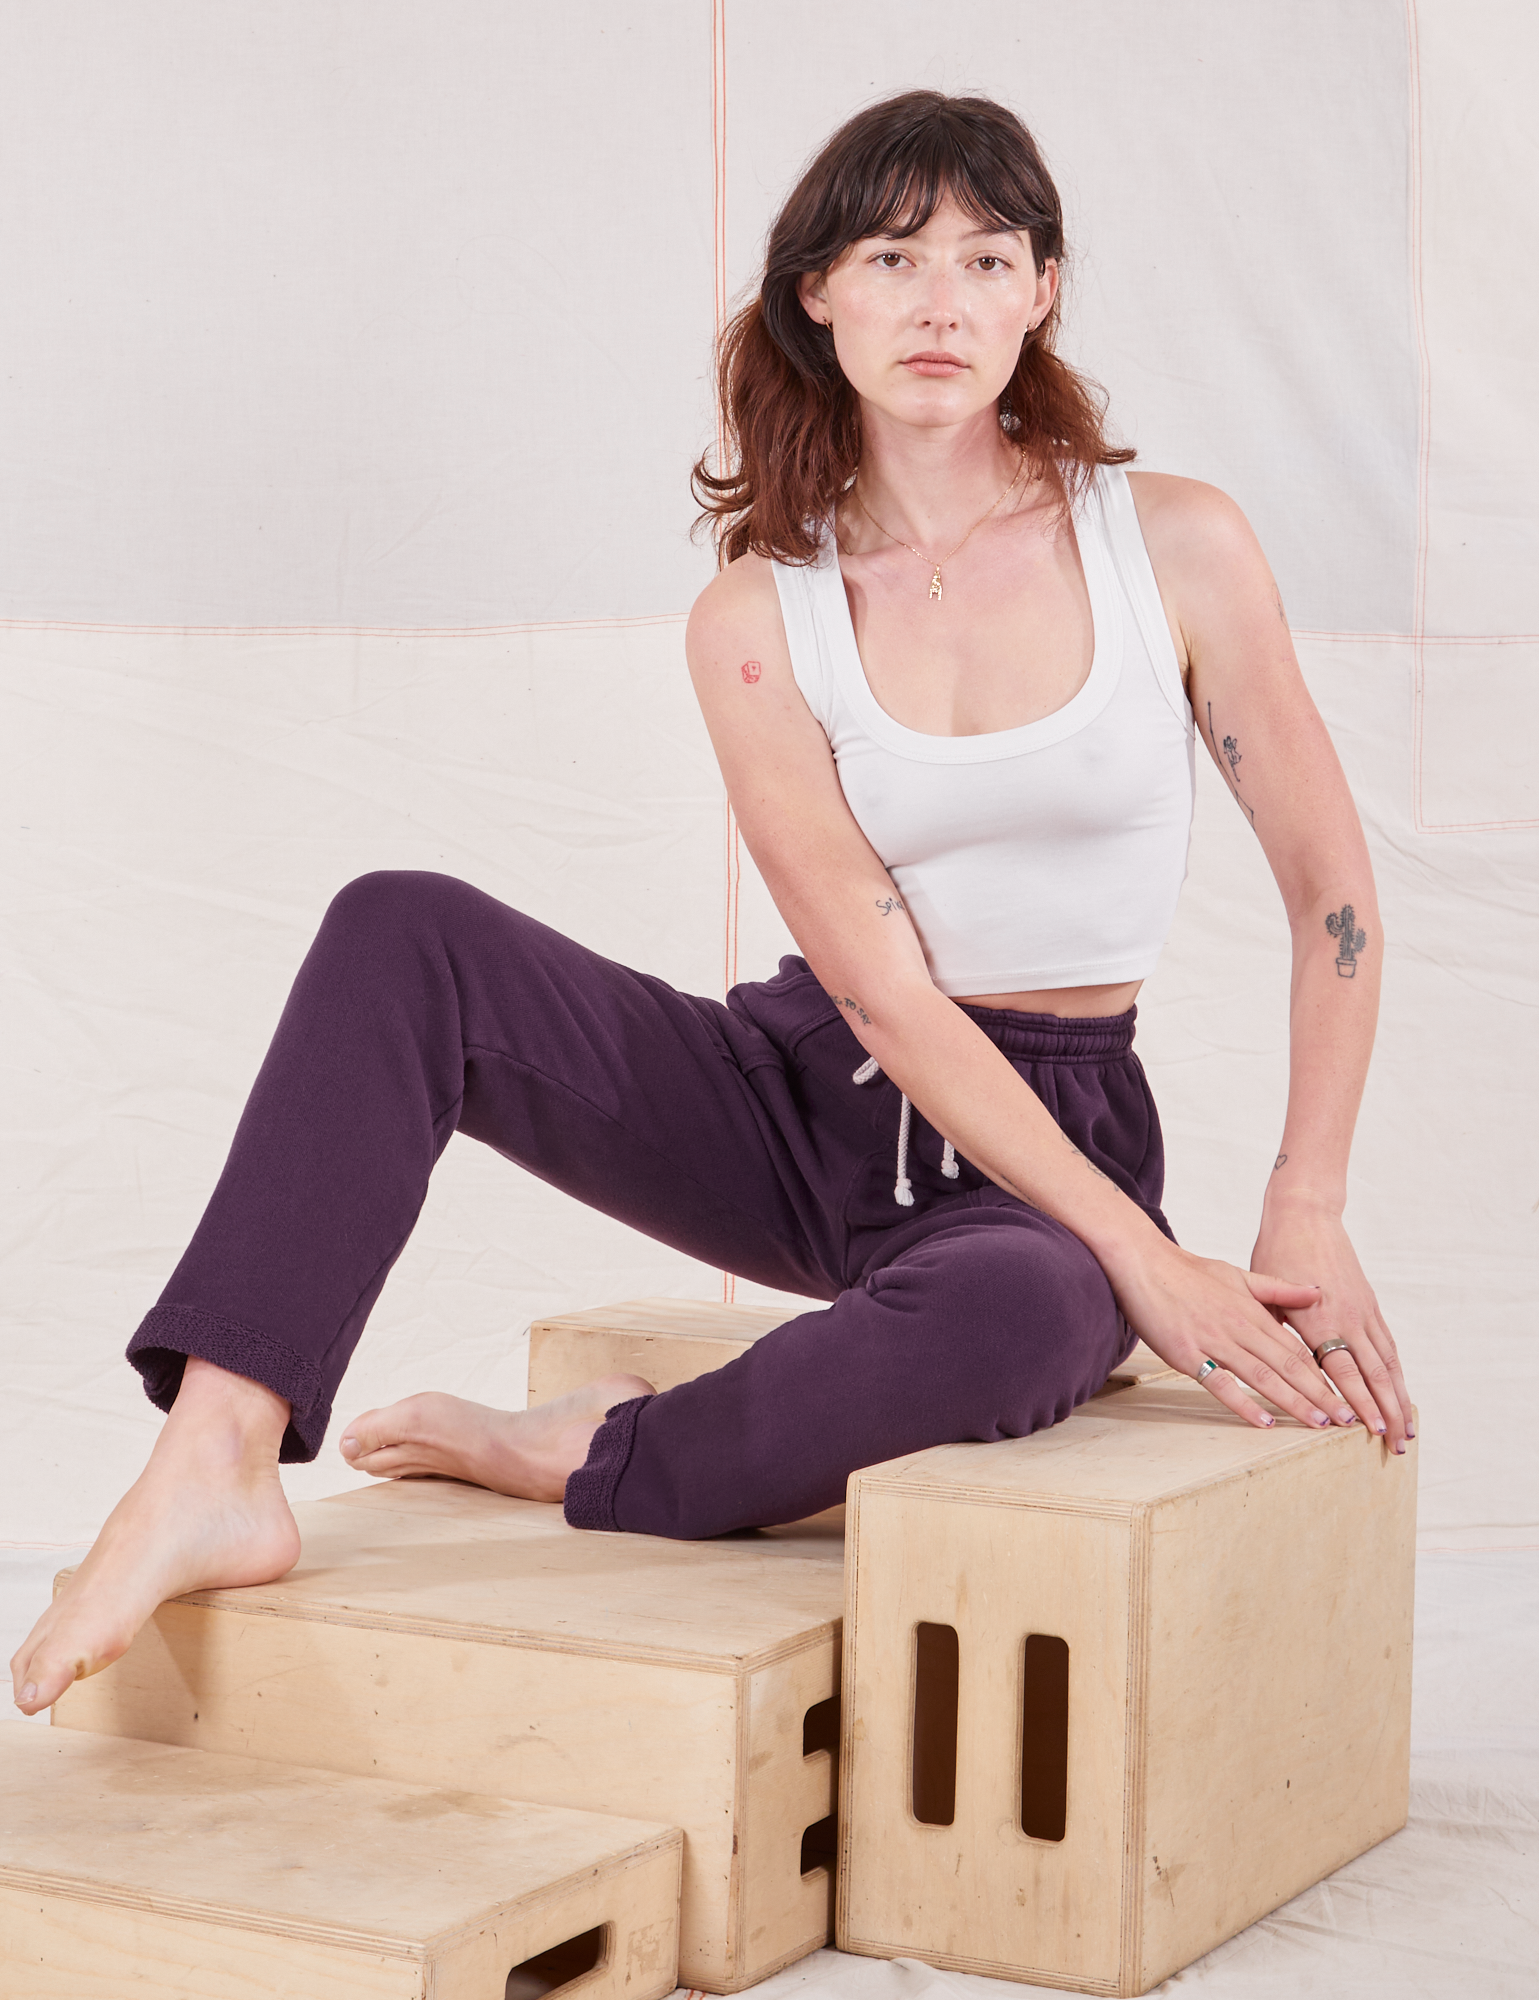 Alex is wearing Rolled Cuff Sweat Pants in Nebula Purple and Cropped Tank in vintage tee off-white